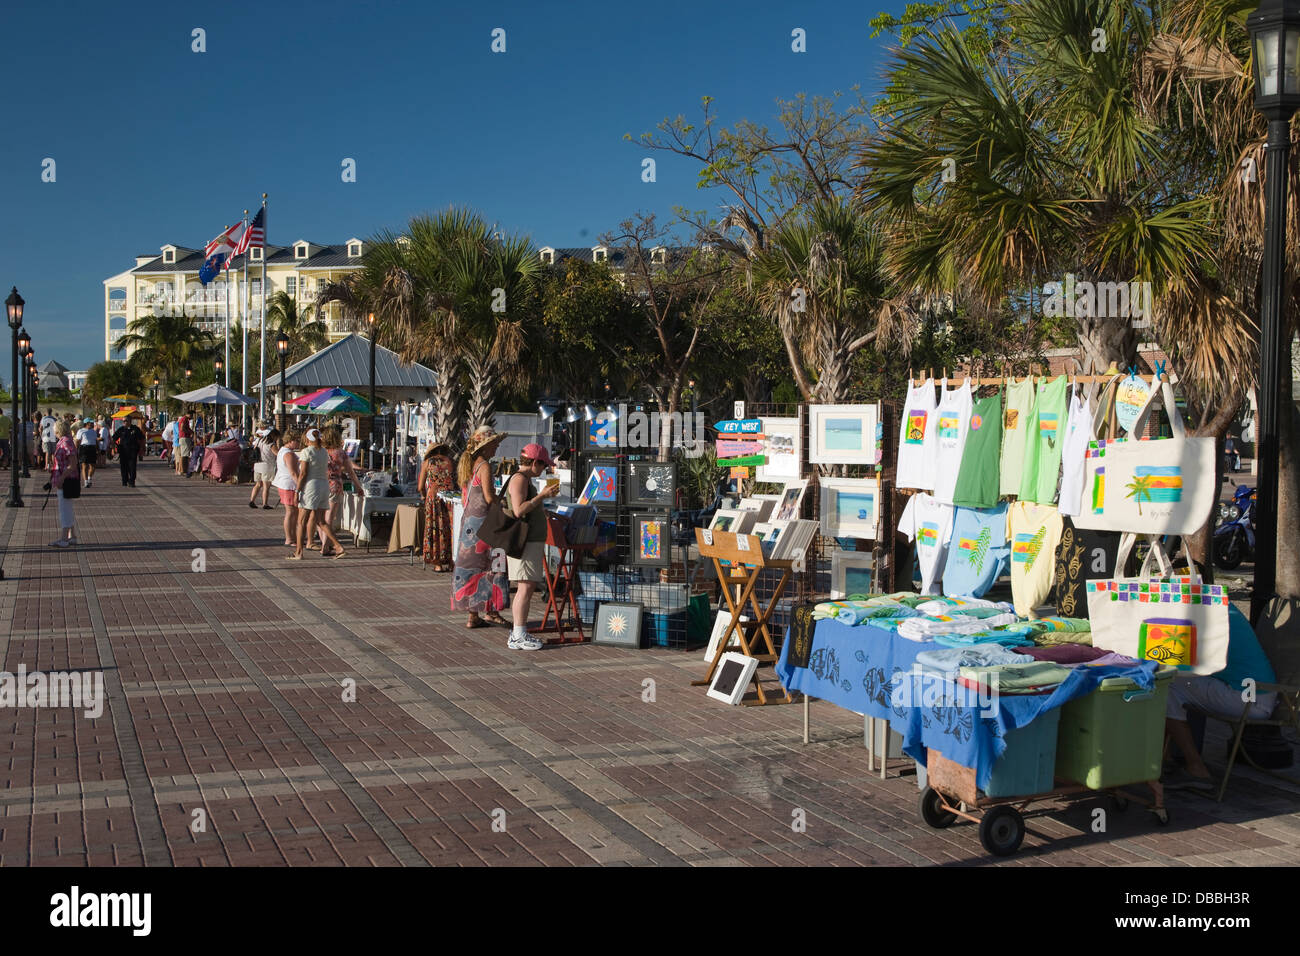 ART MARKET STALLS MALLORY SQUARE OLD TOWN HISTORIC DISTRICT KEY WEST FLORIDA USA Stock Photo